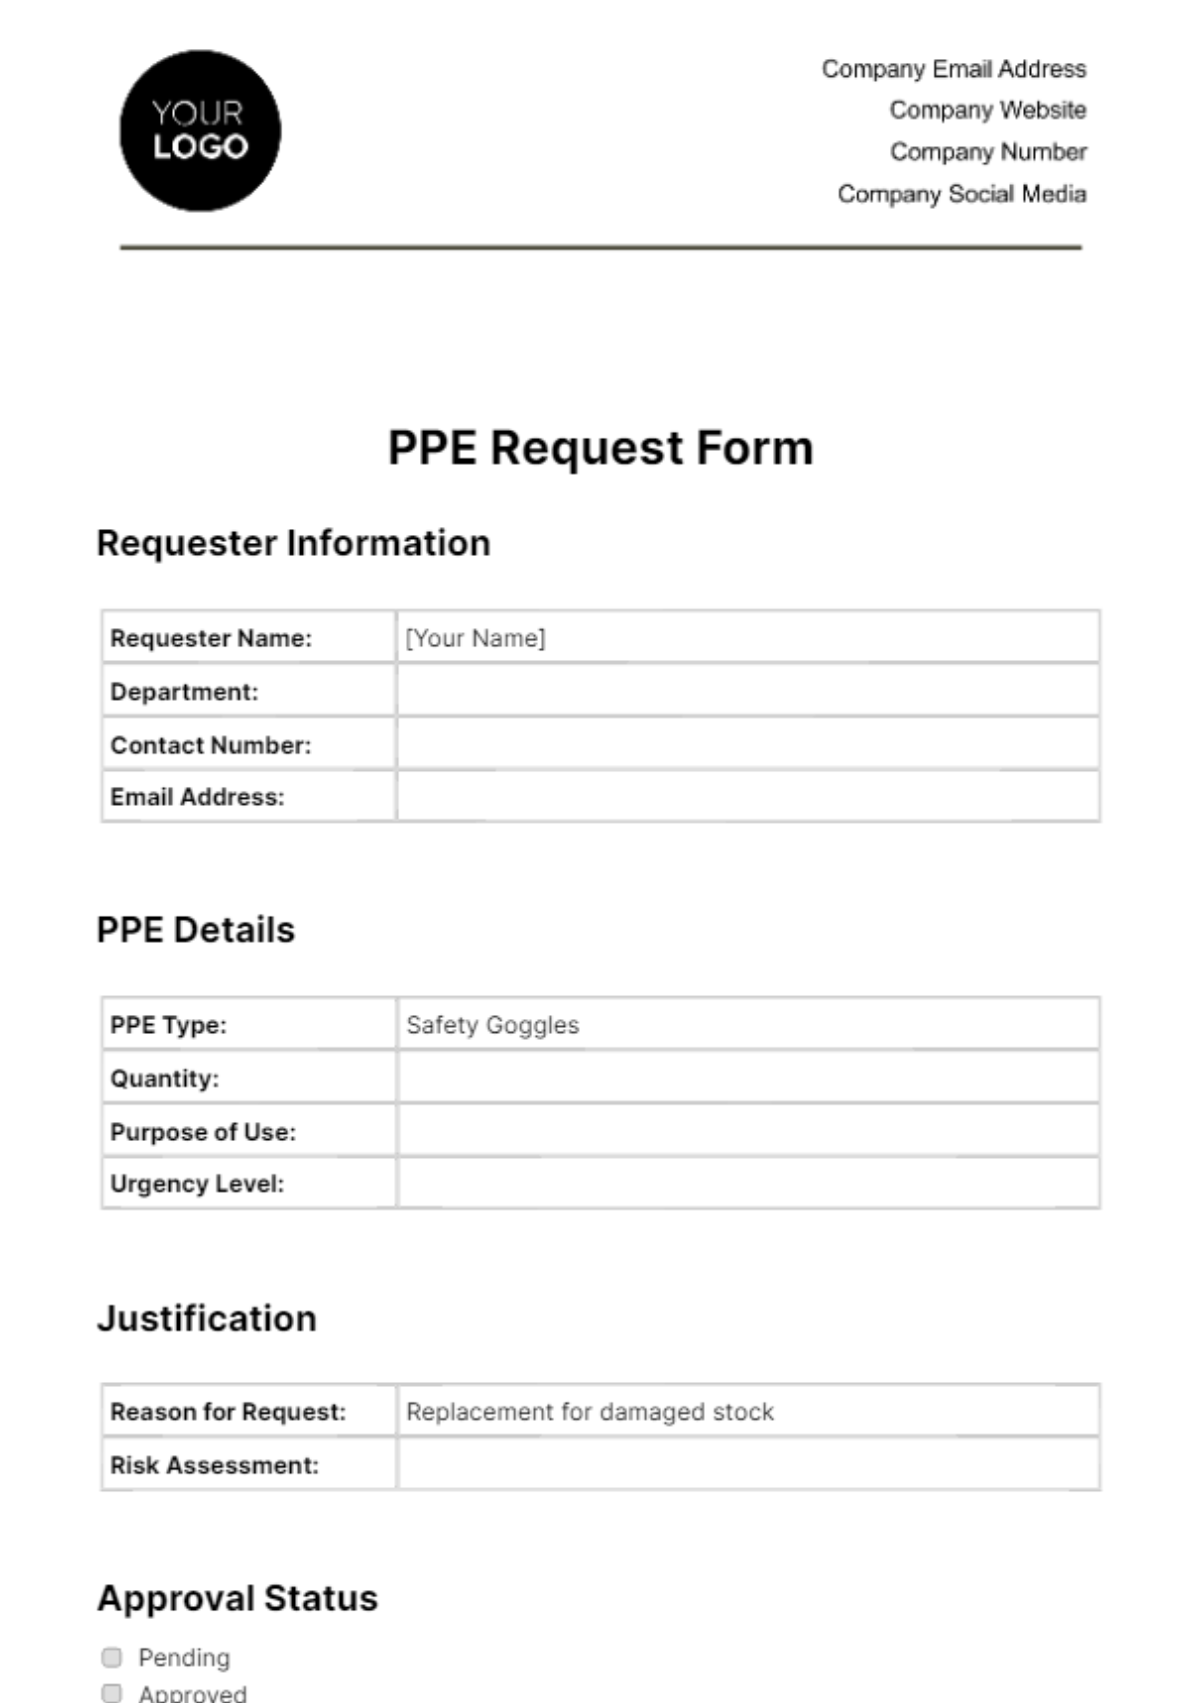 PPE Request Form Template